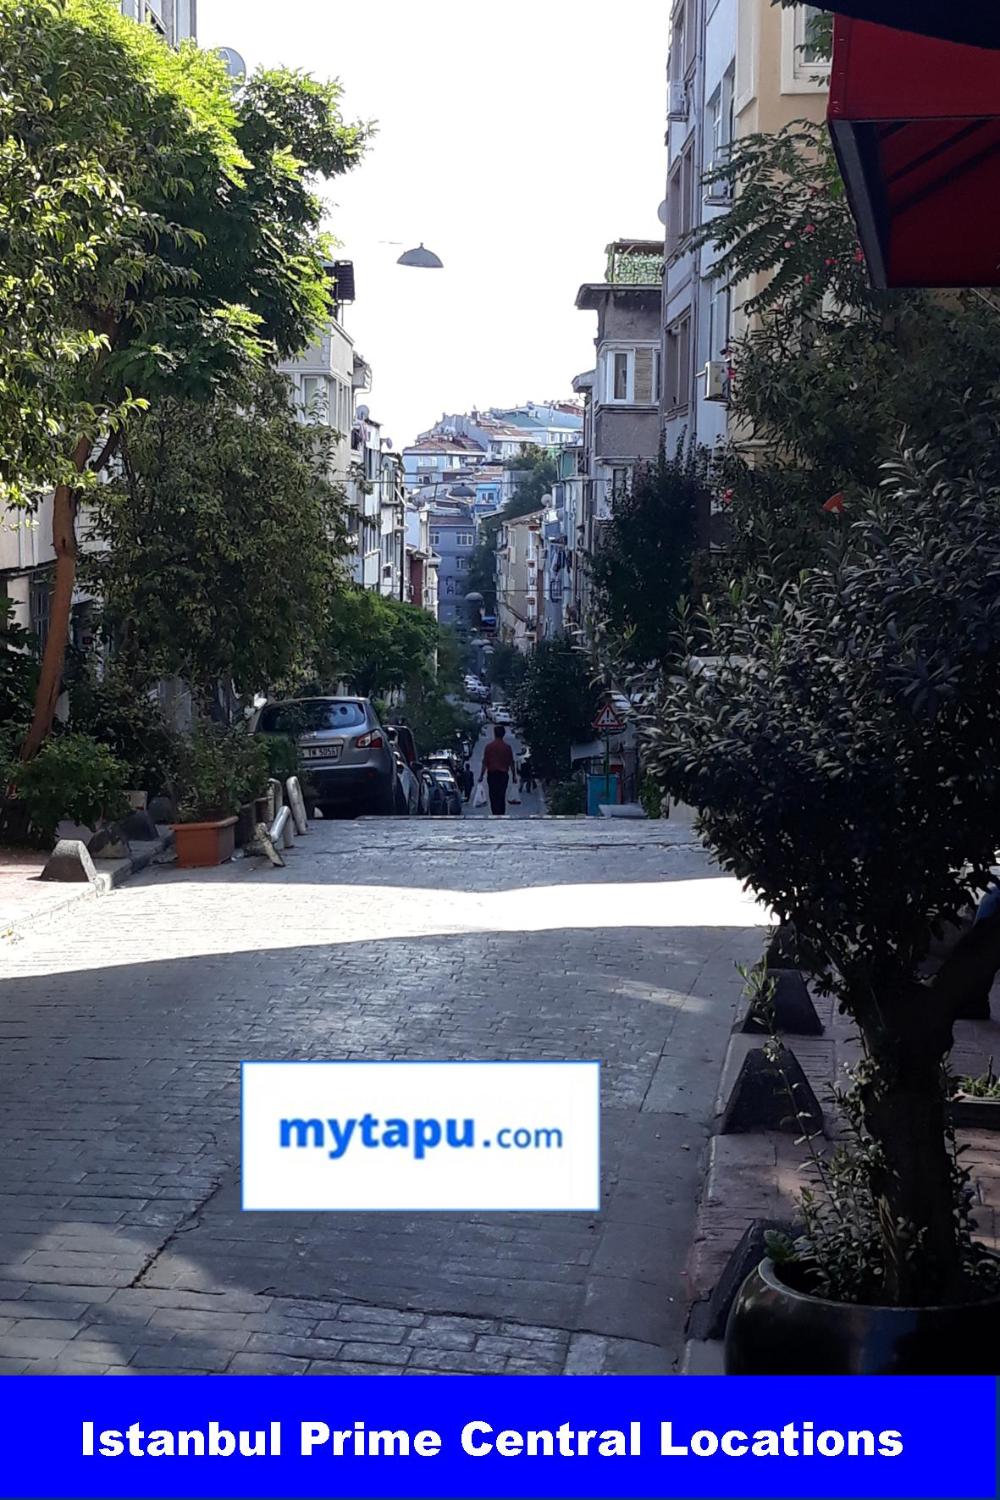 Istanbul Central Locations for Comfortable City Centre Lifestyle